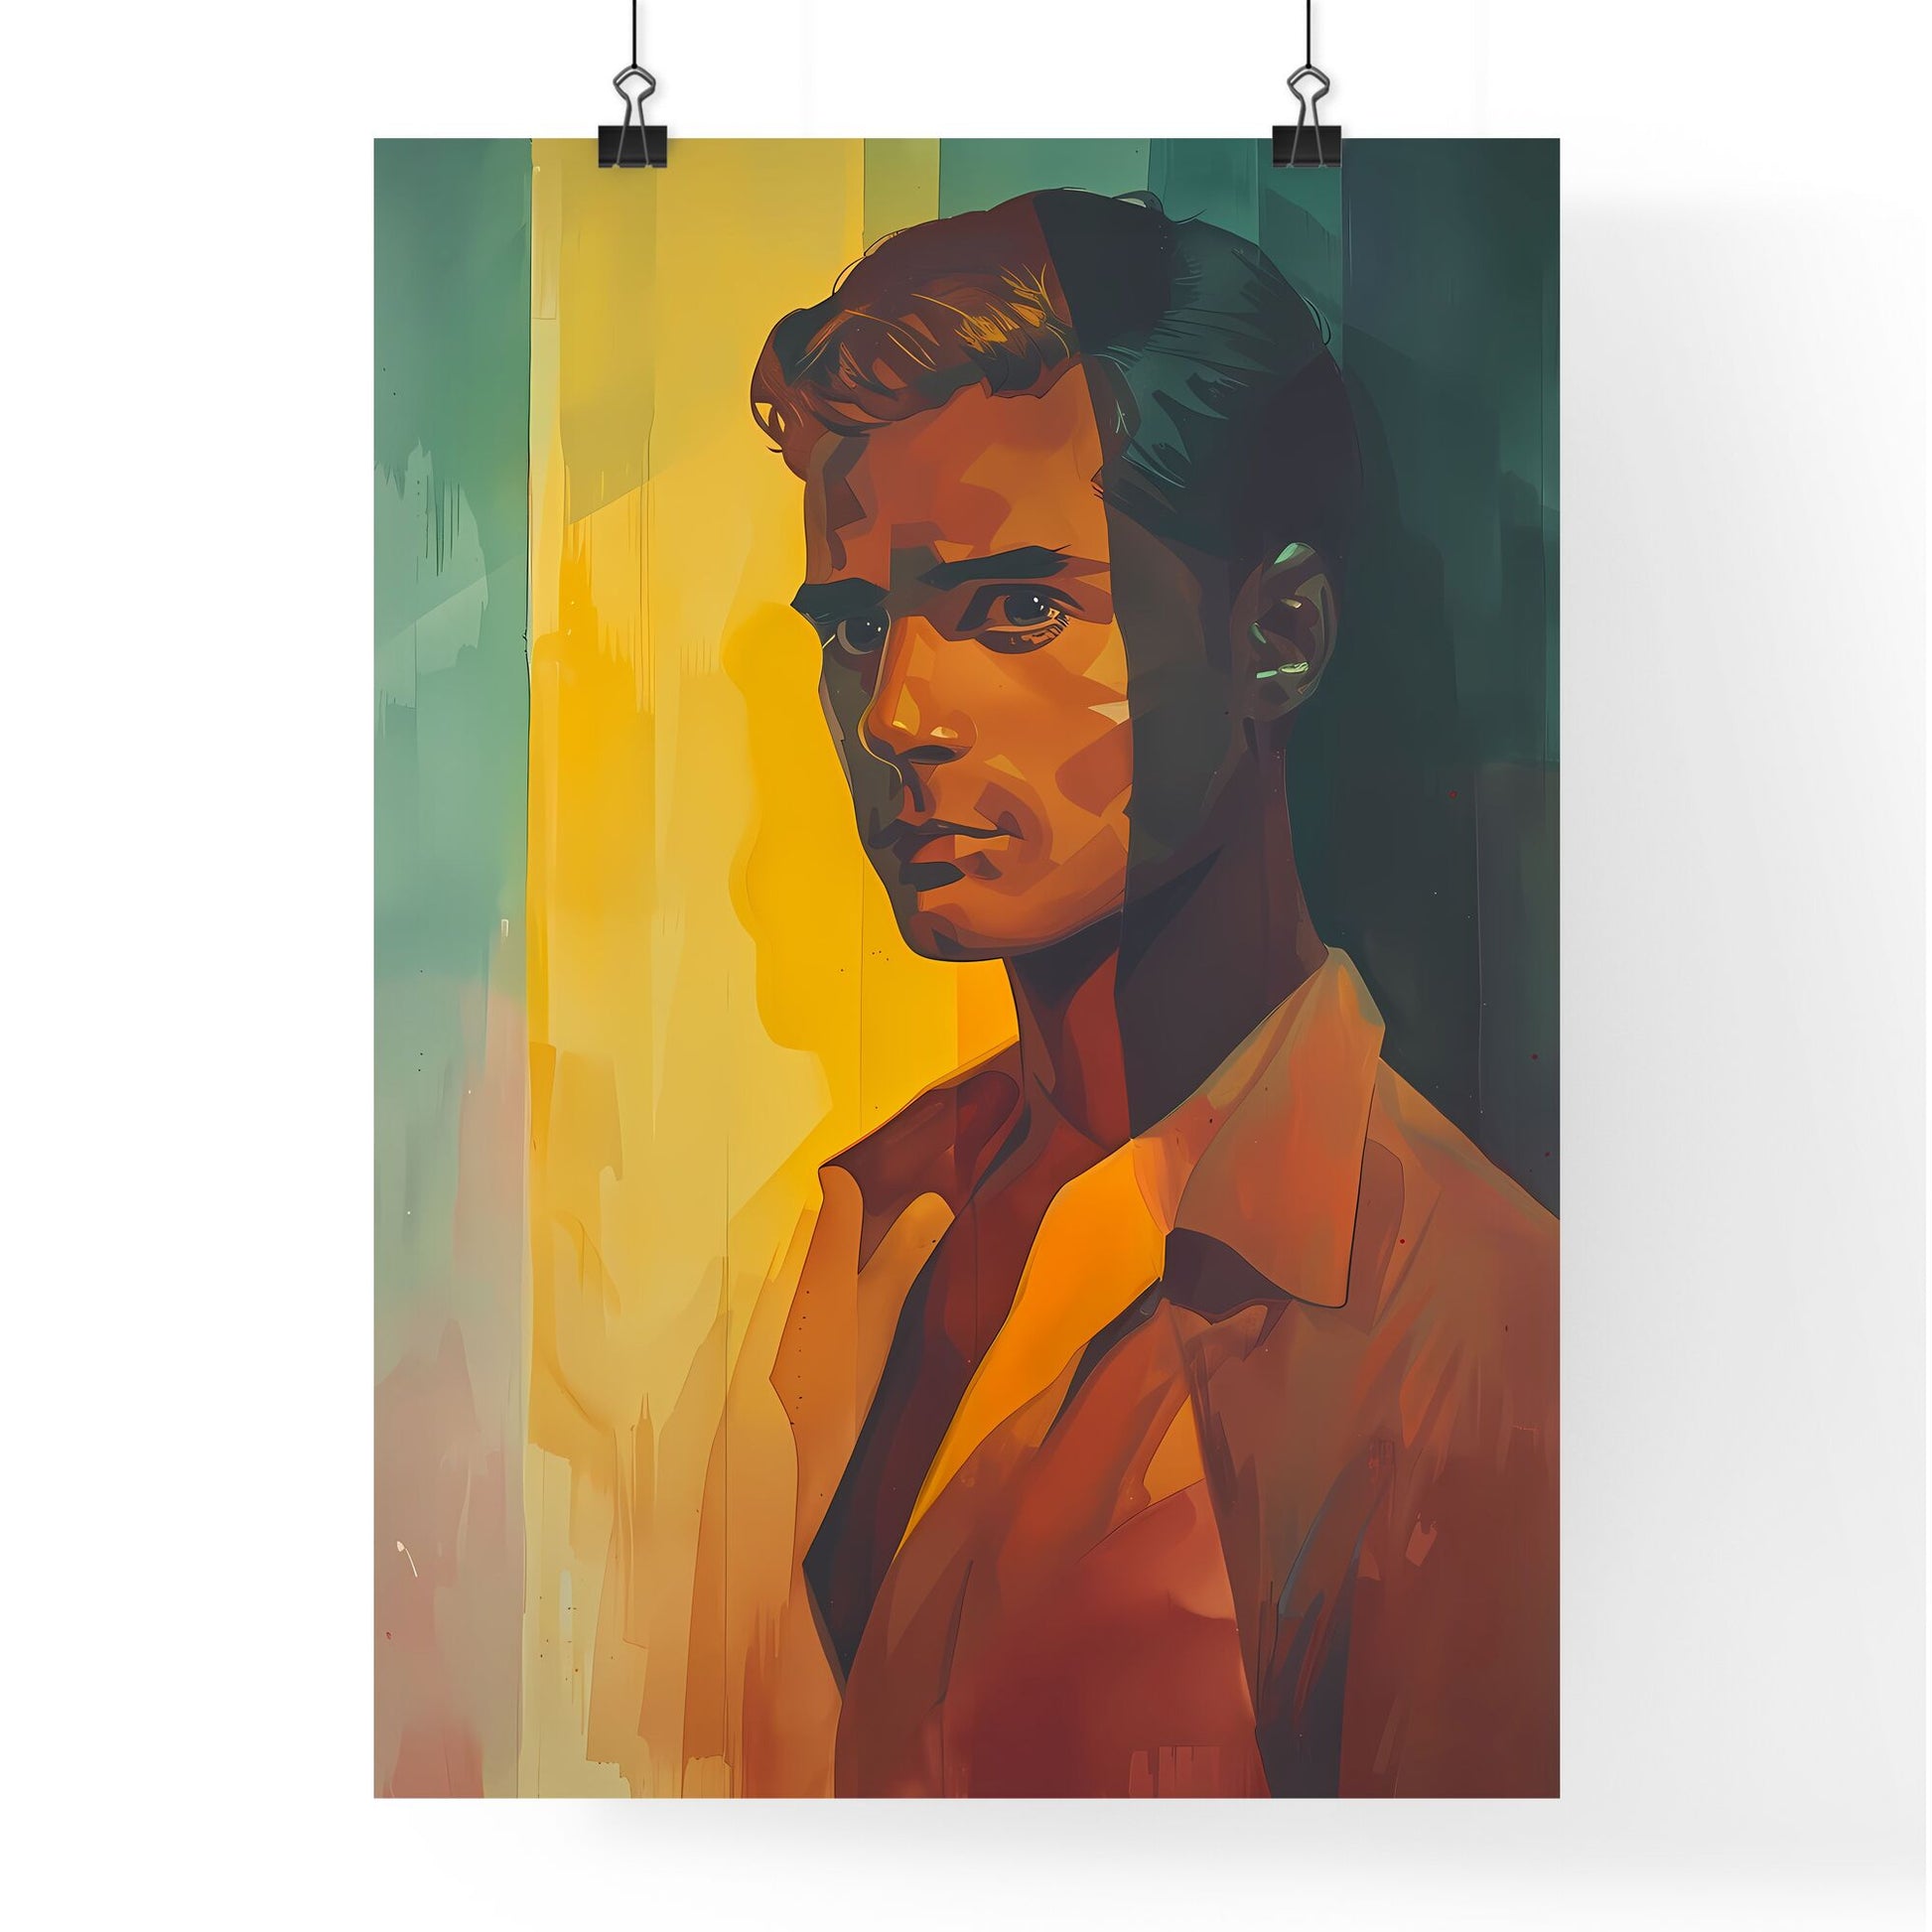 Painting of Daniel Brown in the Shadows: Film Noir-Inspired, Art-Focused, Bronze and Yellow, AP Photo, Vignetting, Mist, Enigmatic Character, Brown Shirt Default Title